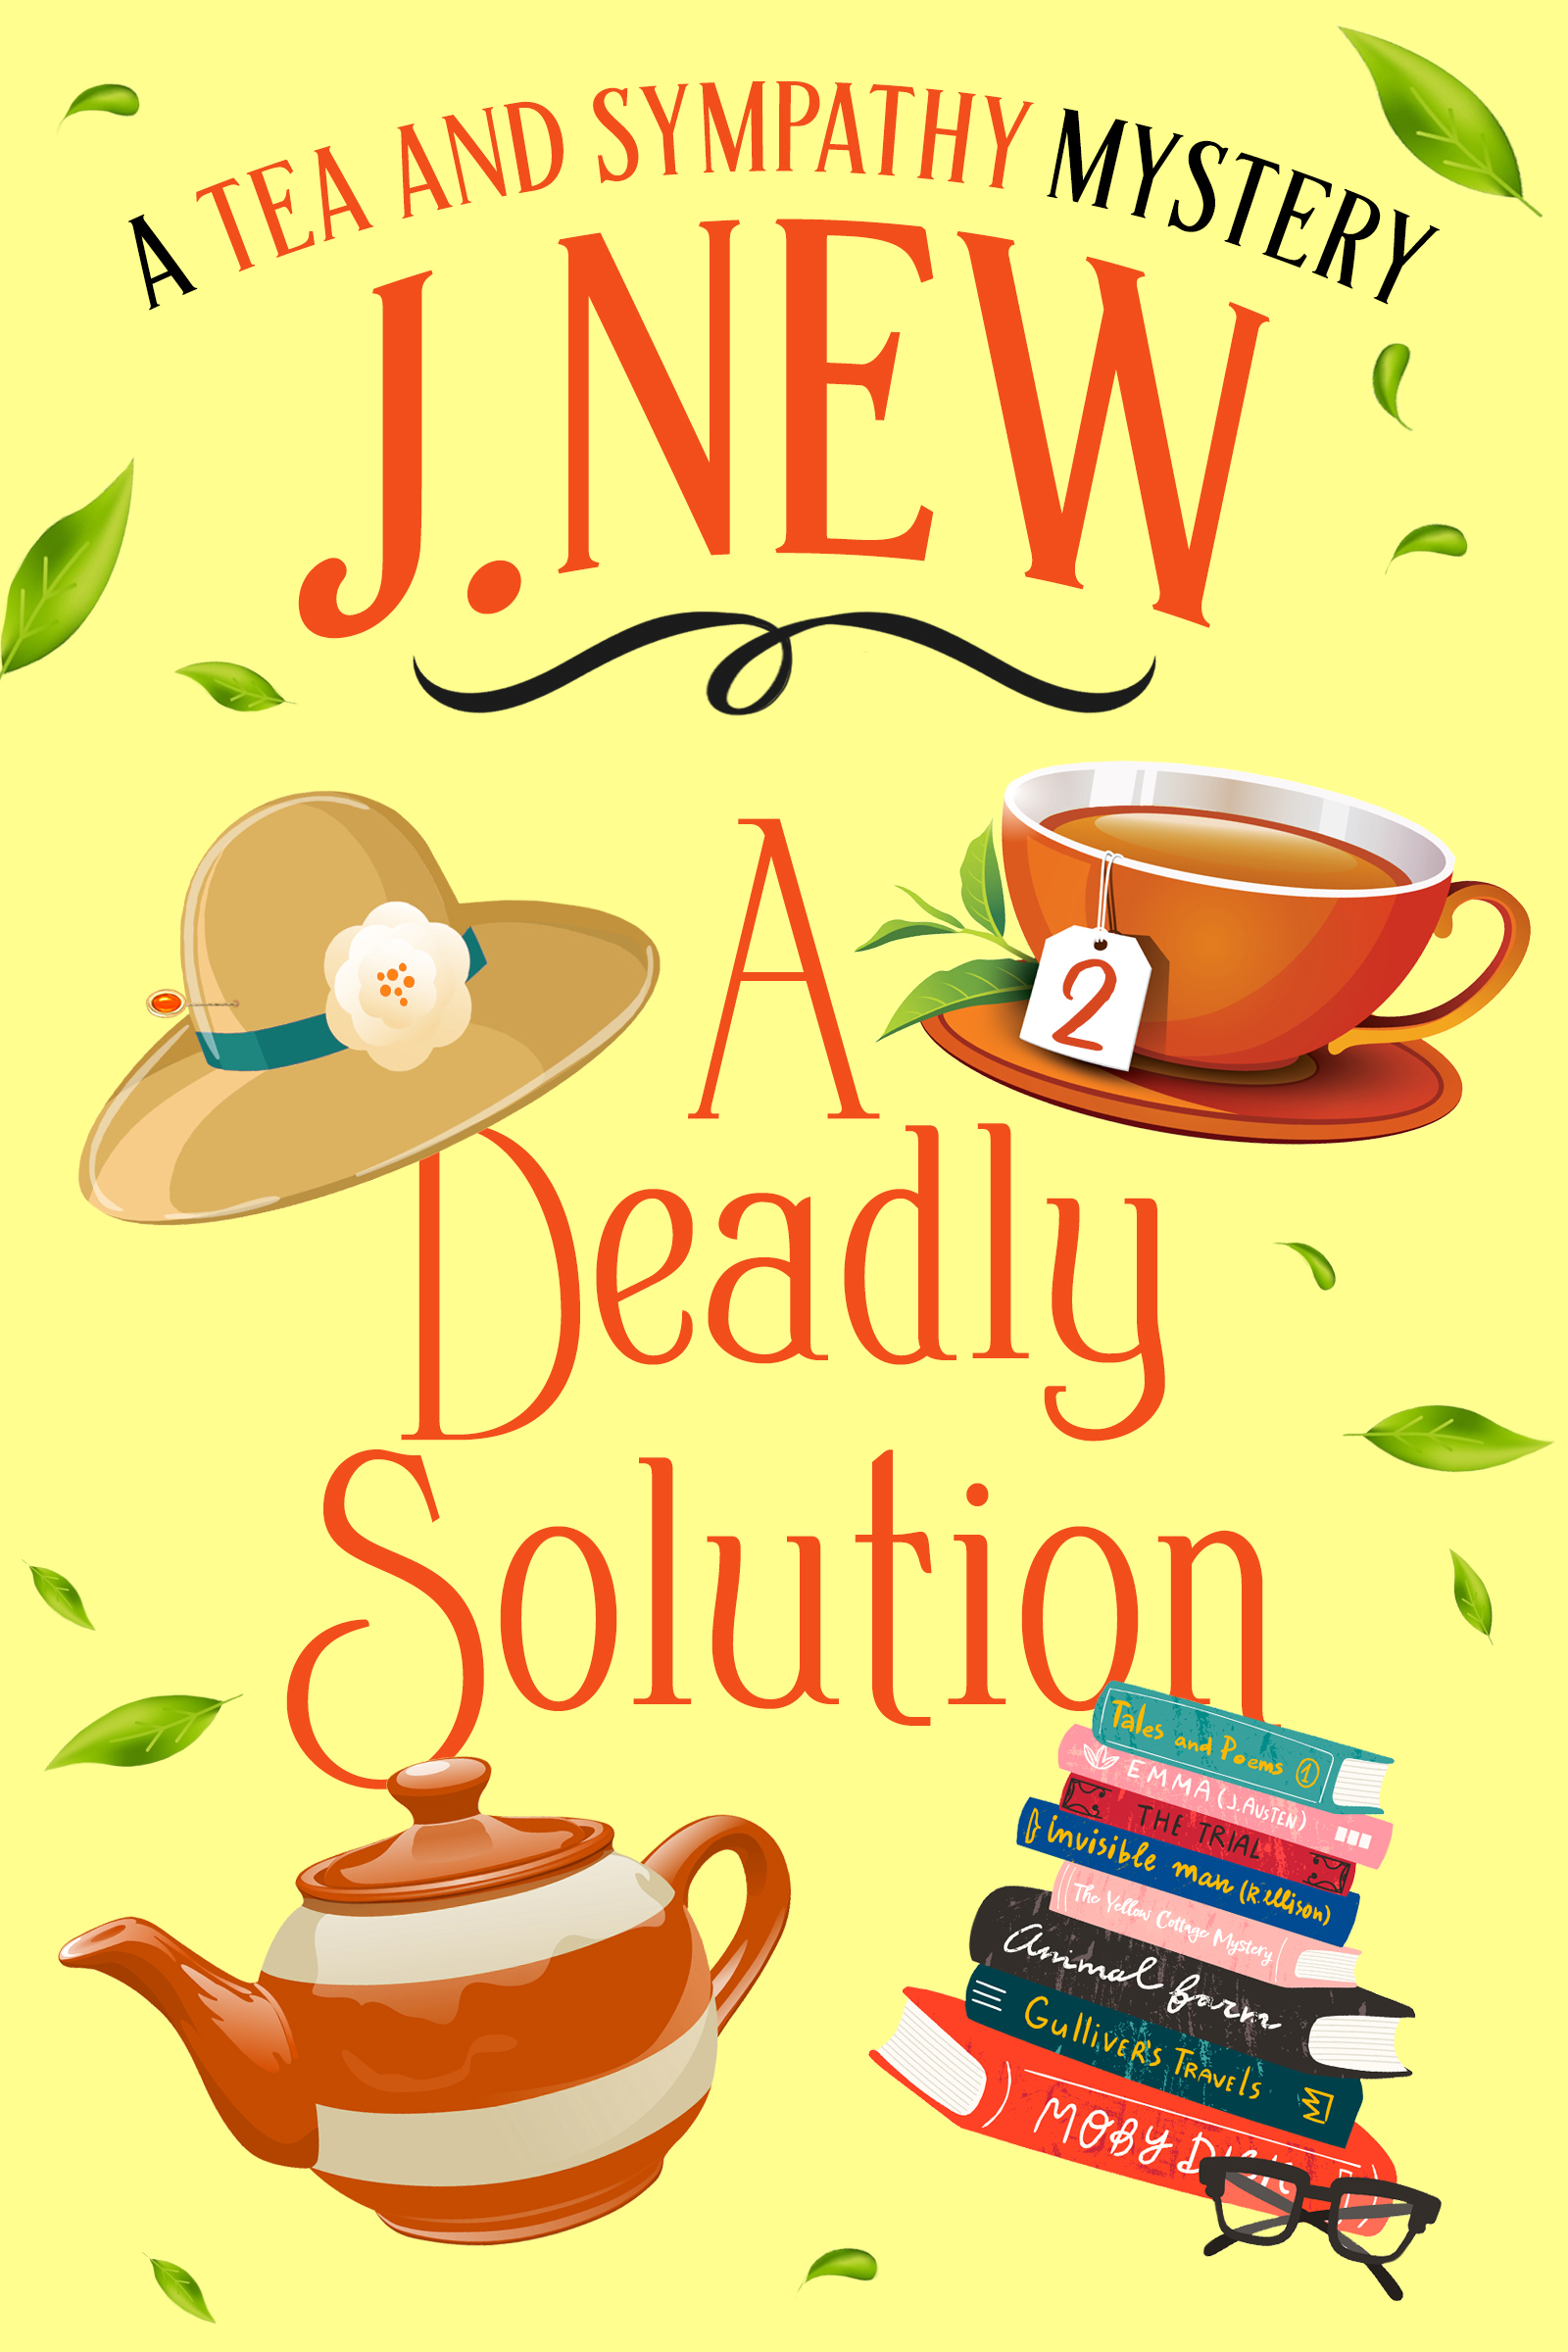 A Deadly Solution book 2 in the popular British cozy culinary mystery series by author J. New